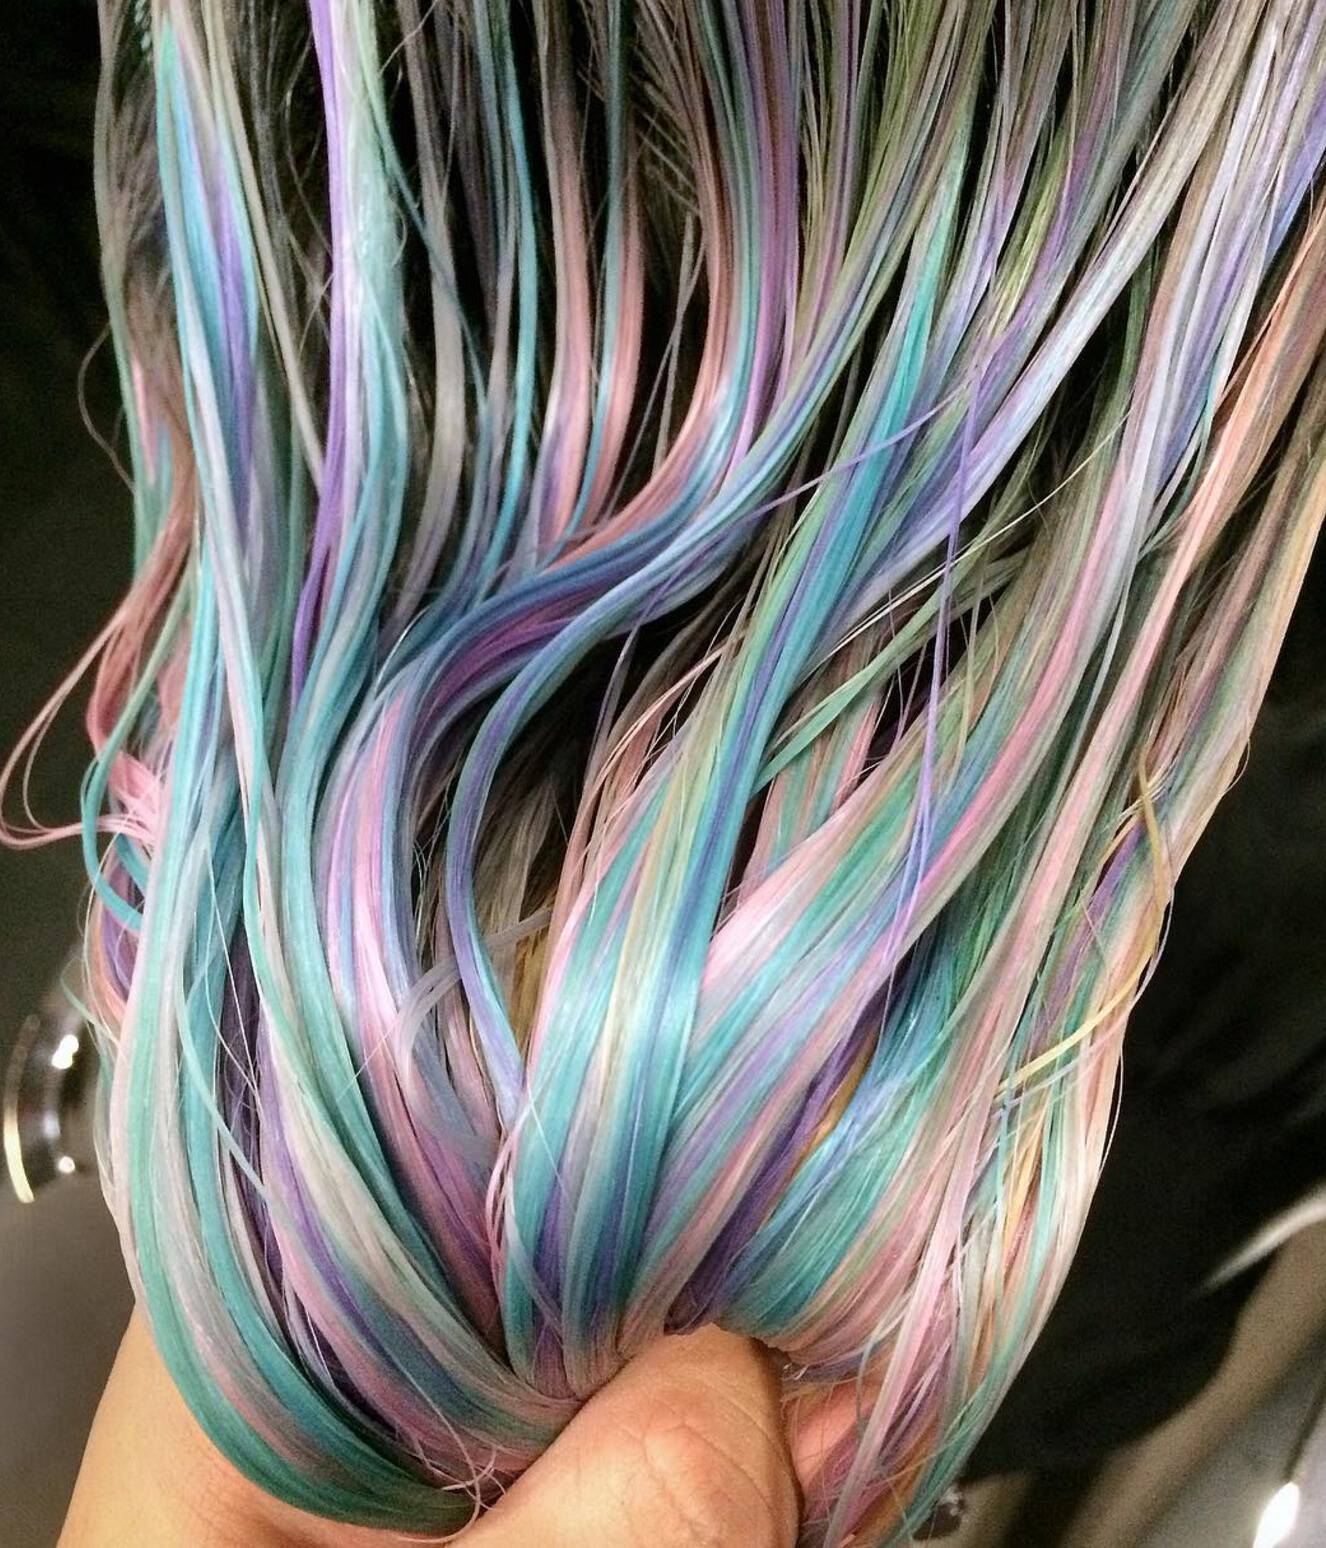 Here's what holographic hair looks like when it's wet.